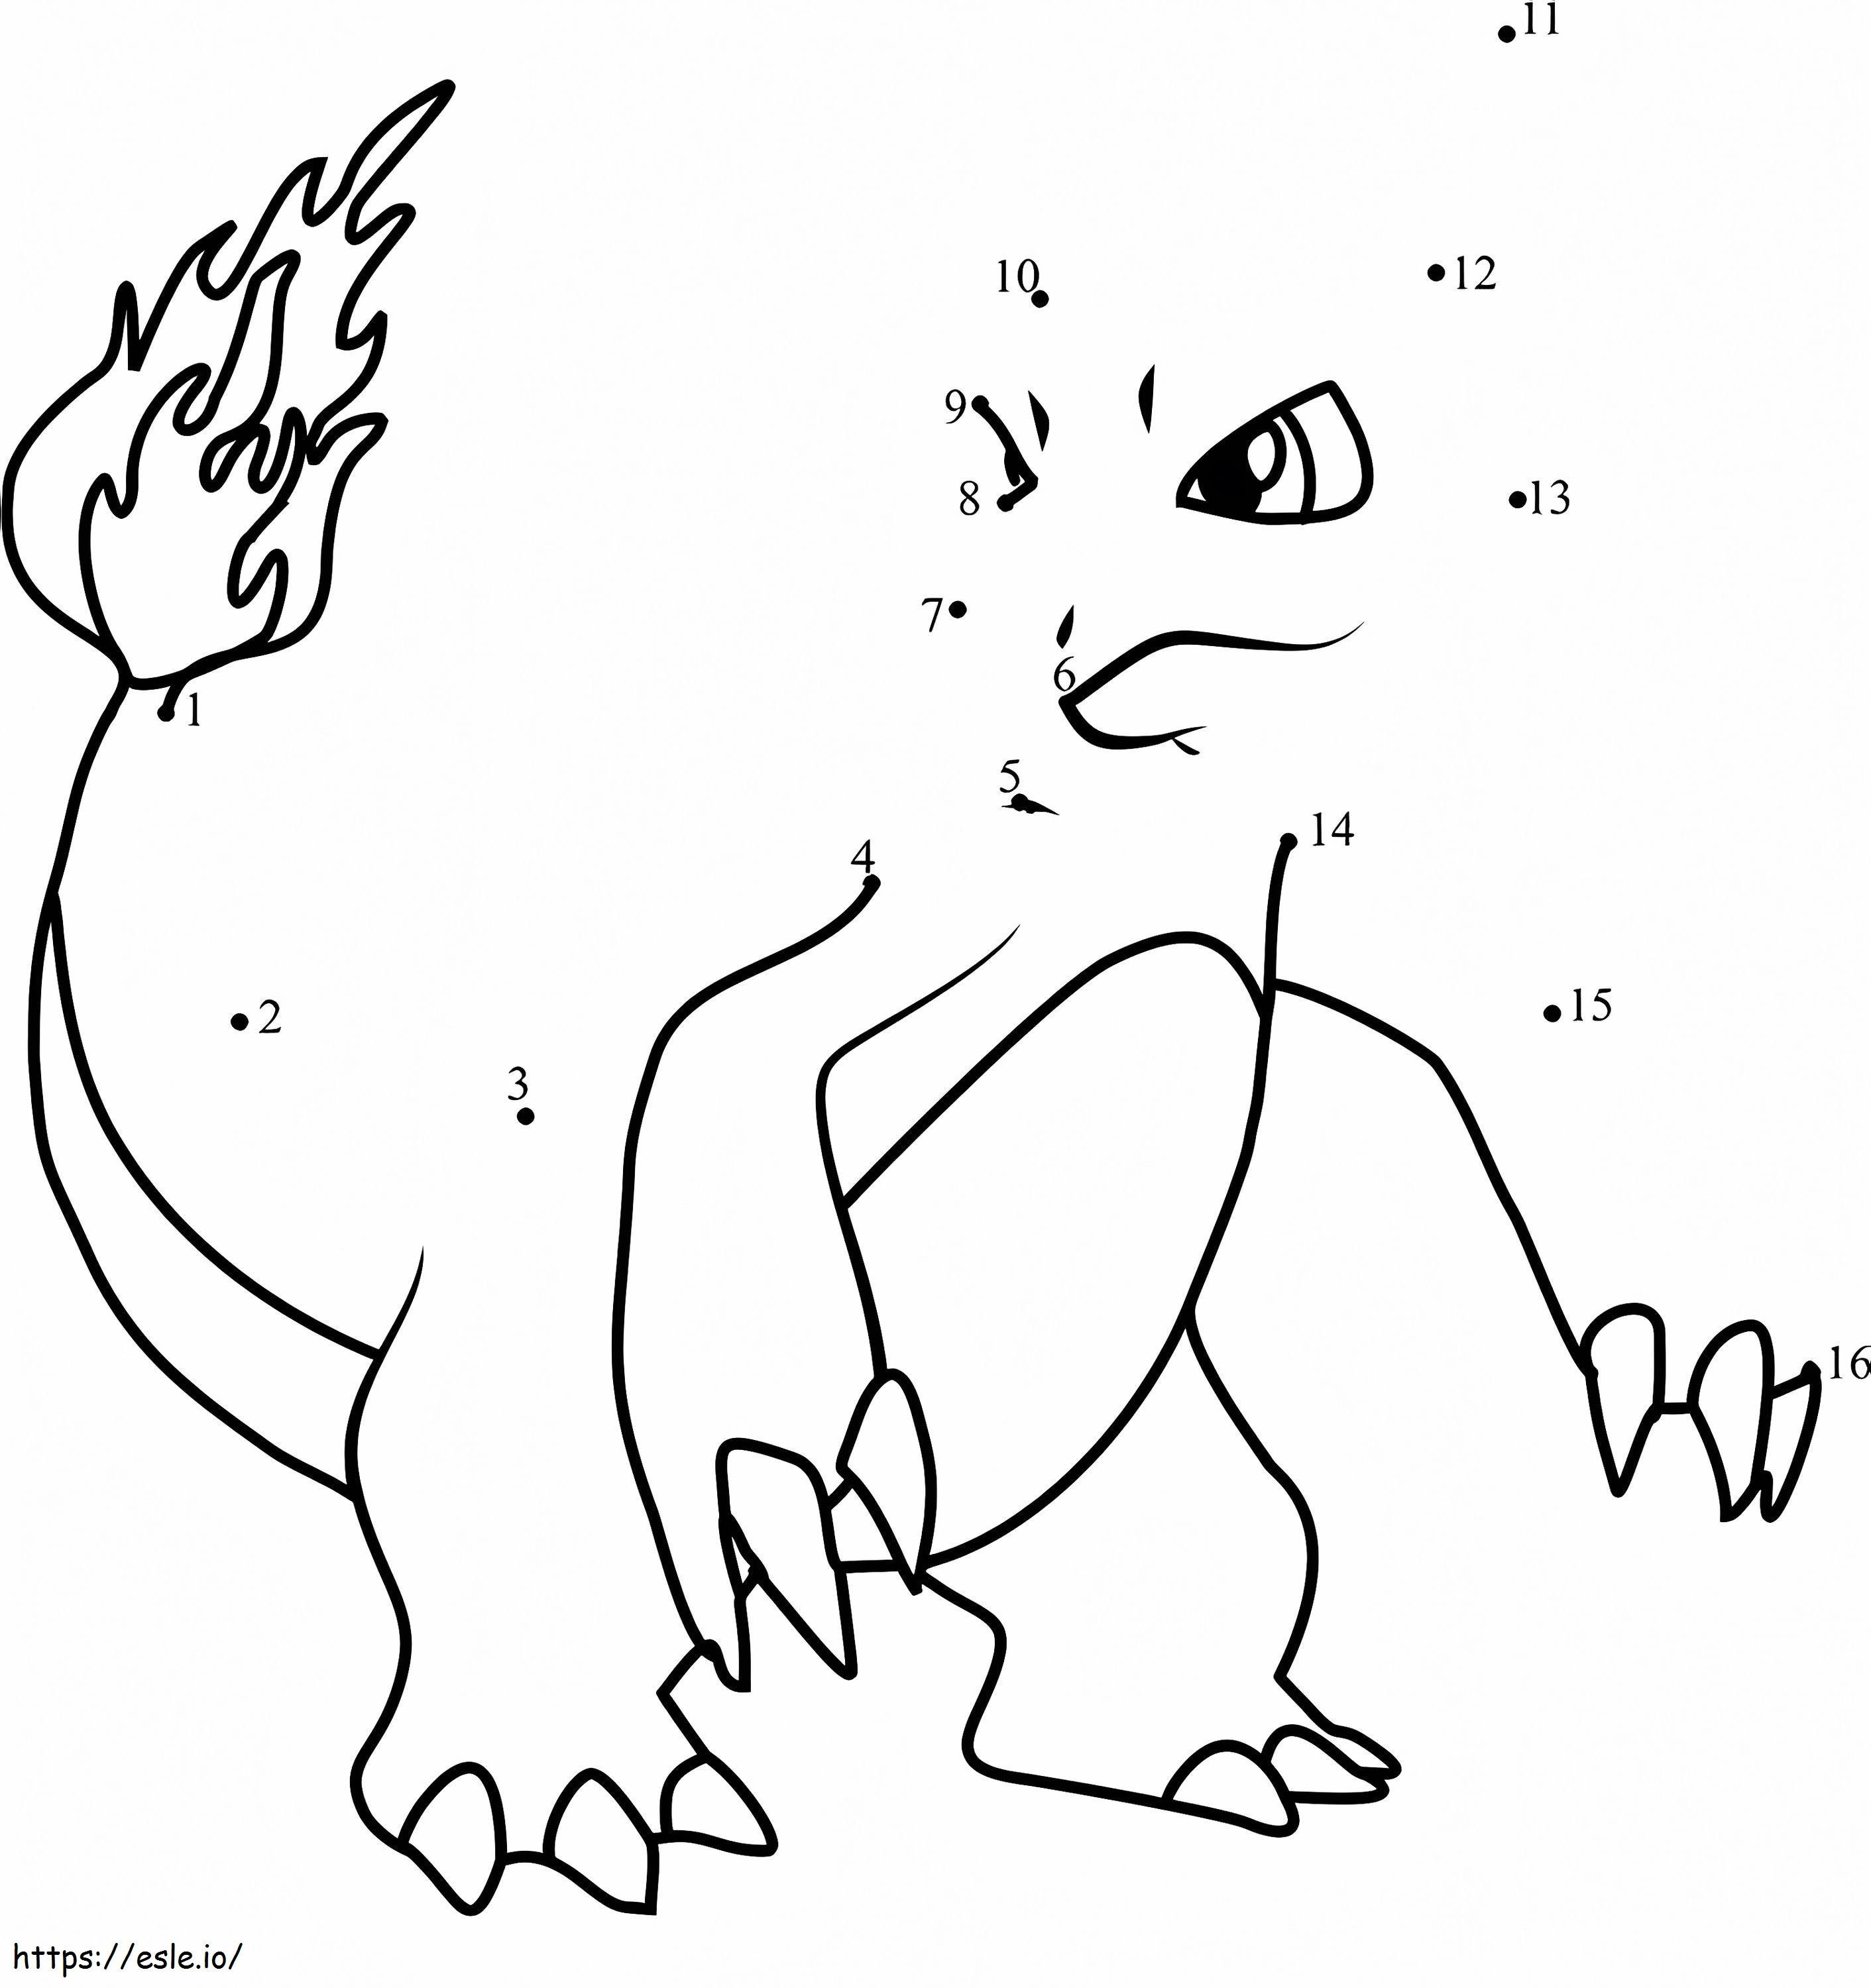 Charmeleon Dot To Dot Coloring Page coloring page